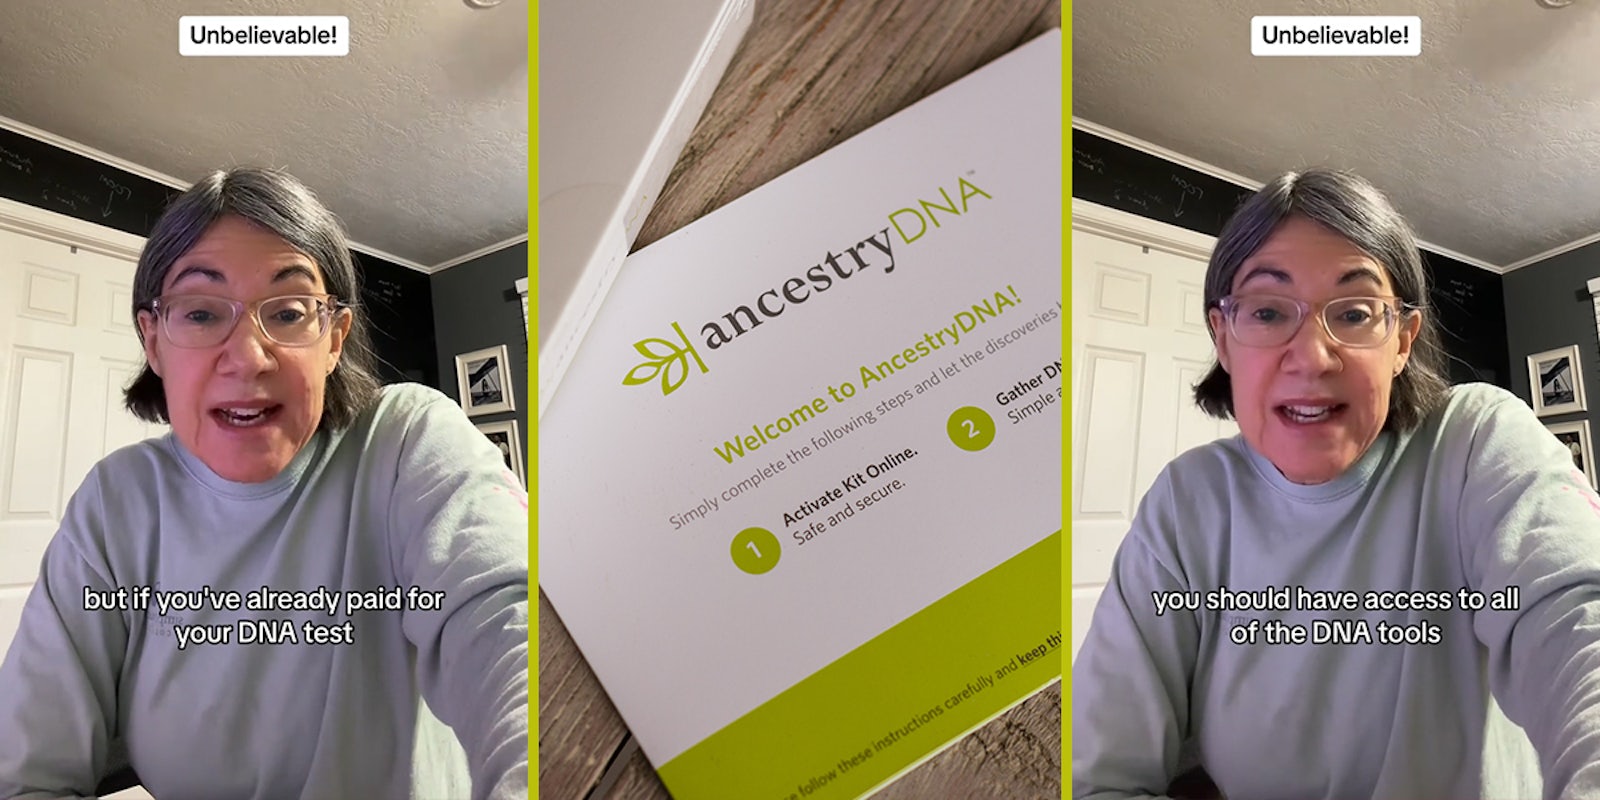 woman speaking with caption Unbelievable! but if you've already paid for your DNA test' (l) ancestryDNA card (c) woman speaking with caption Unbelievable! you should have access to all of the DNA tools' (r)